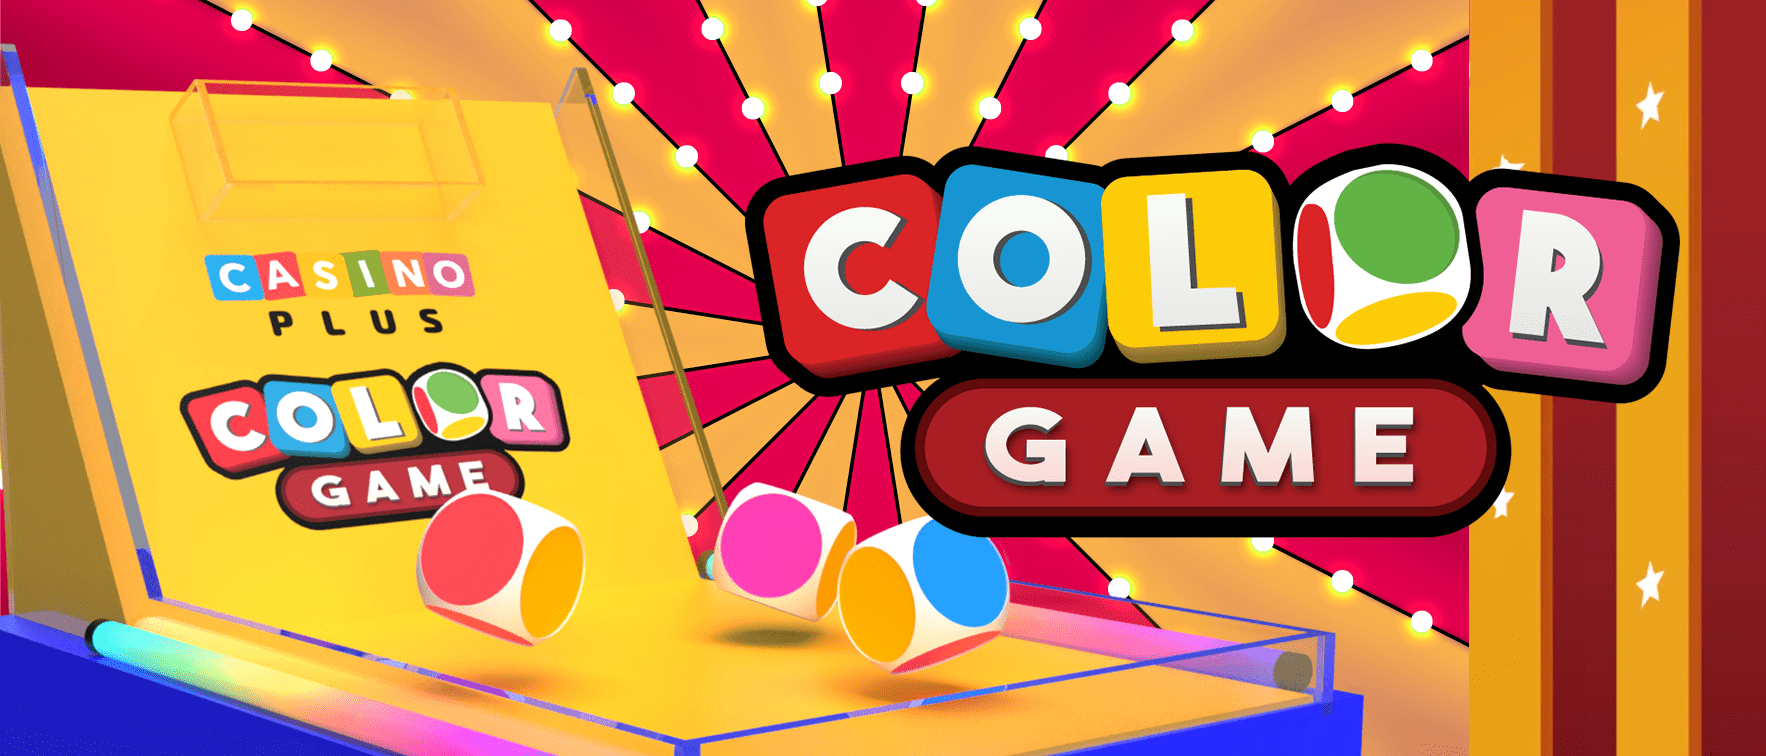 Casino Plus Color Game Betting Odds CG01-24070423 July 04 2024